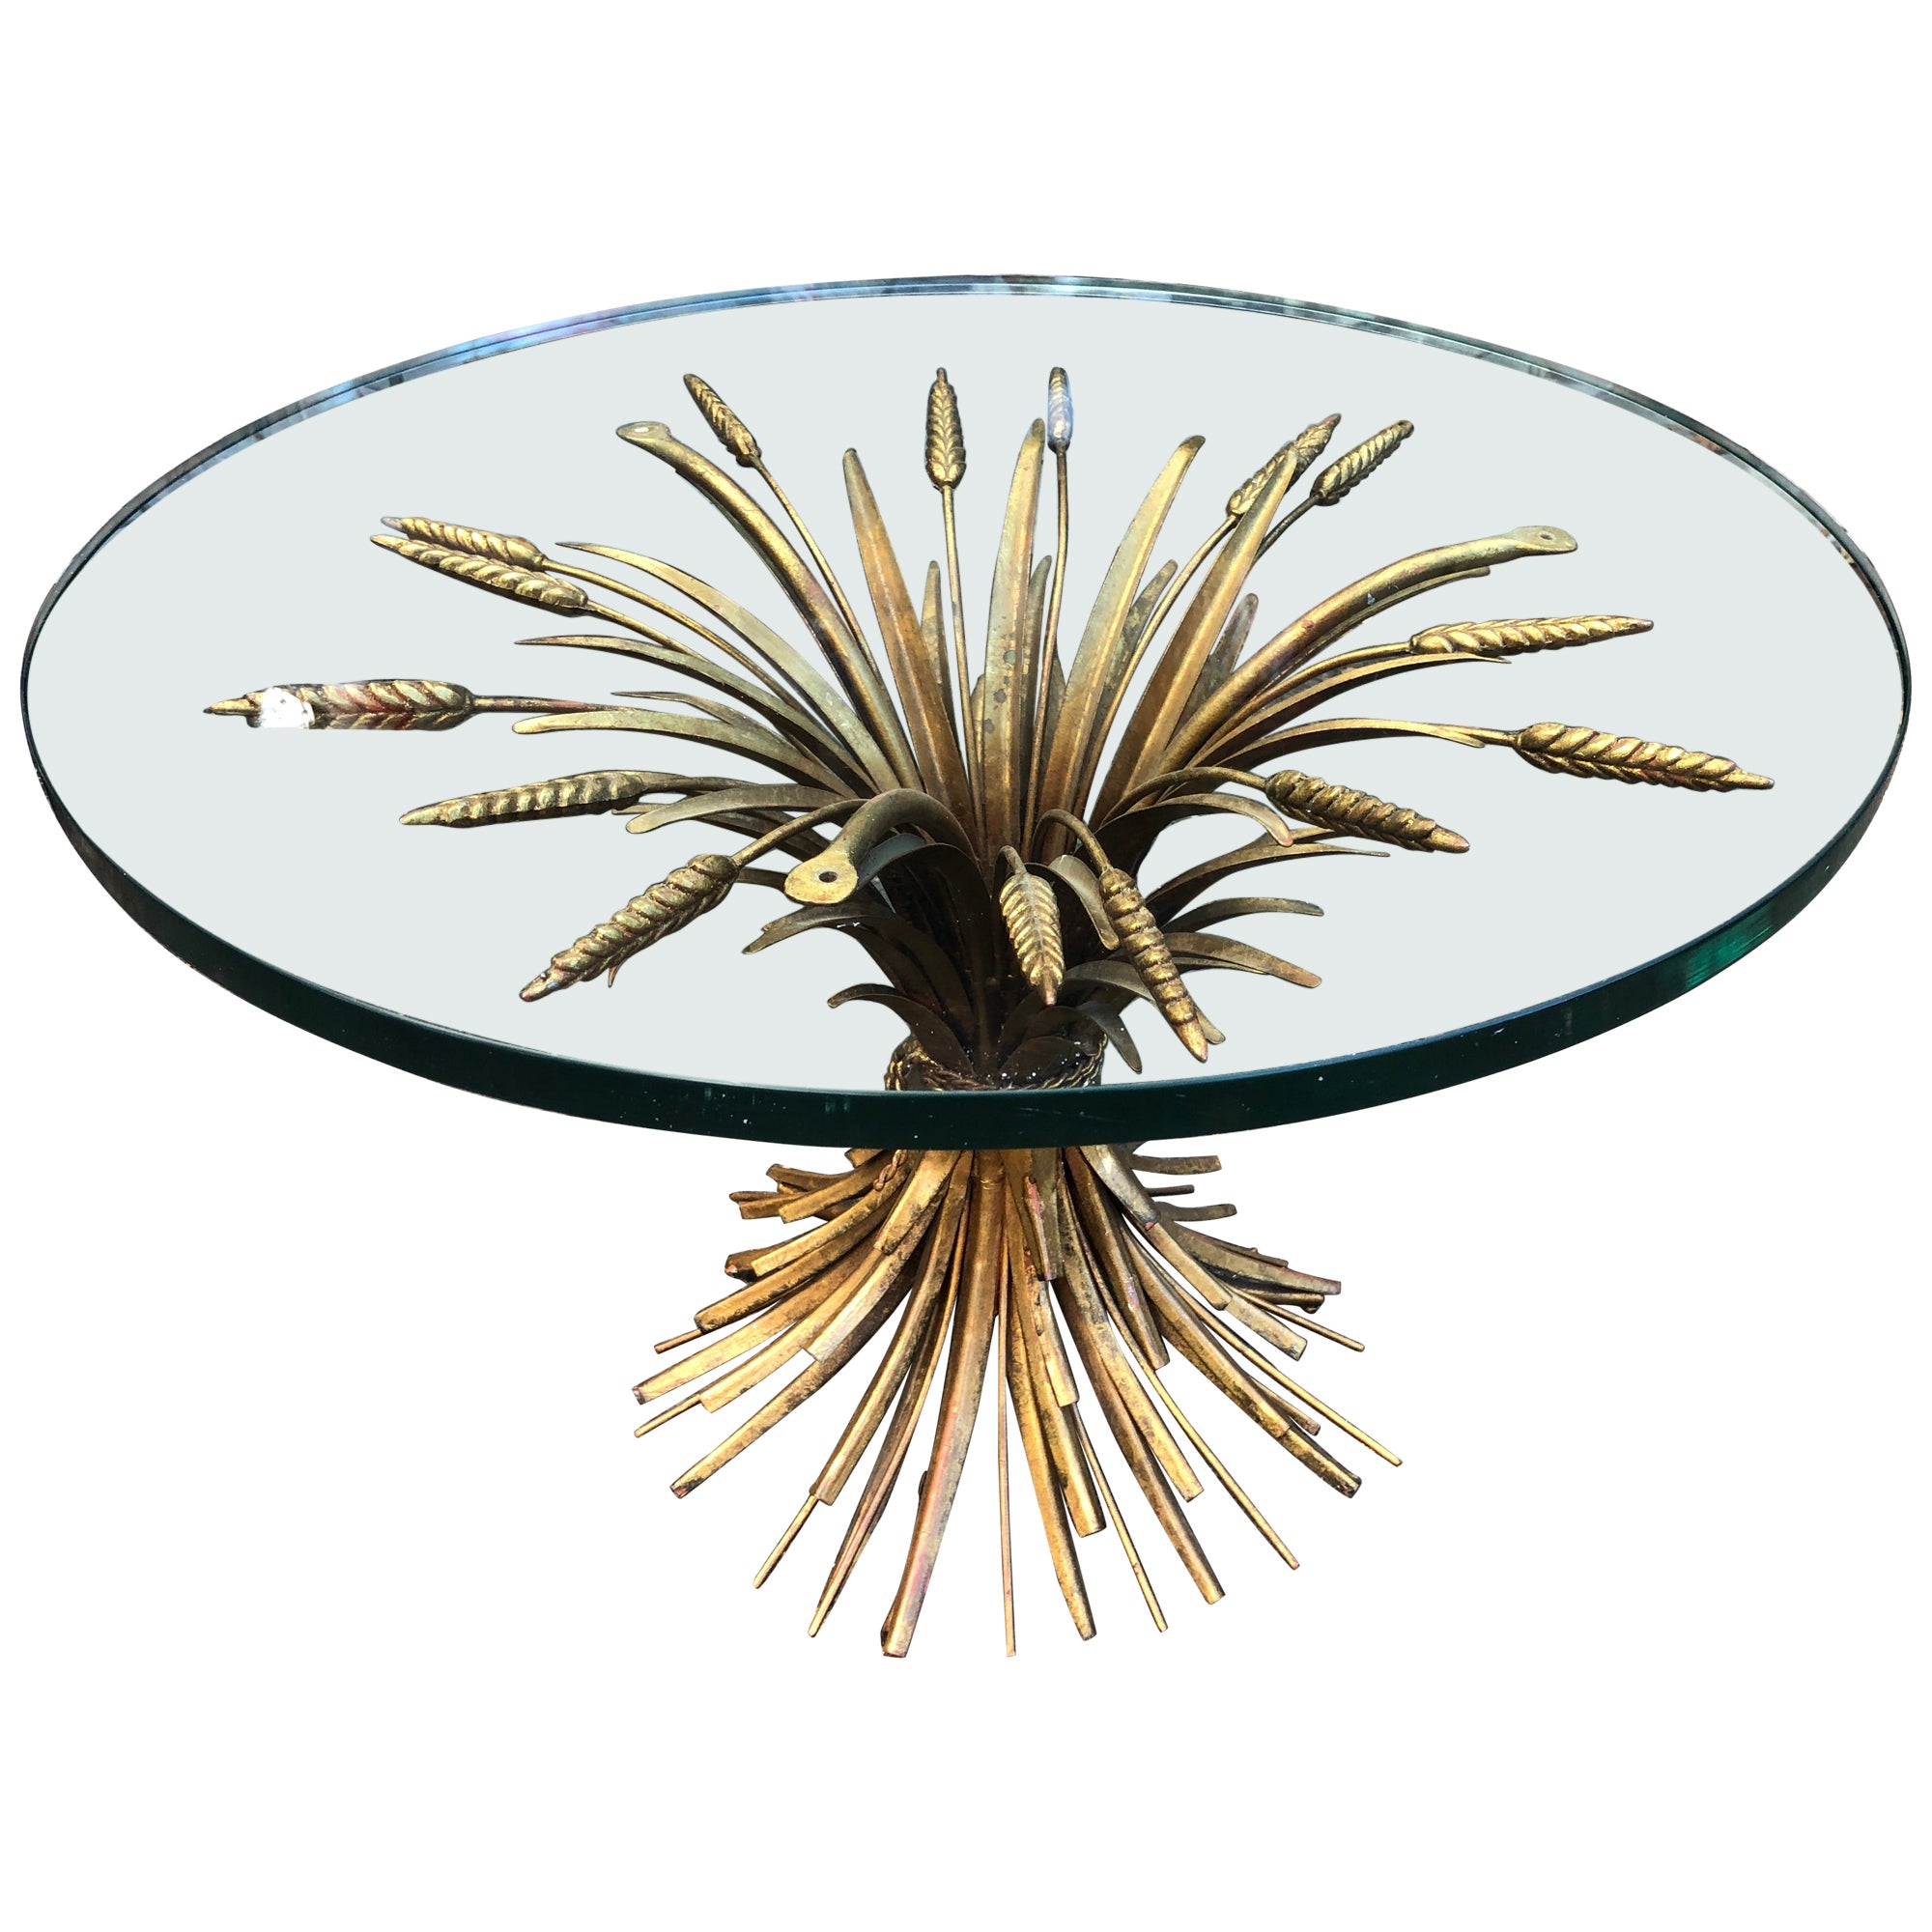 Superbe table d'appoint Hollywood Regency dorée style Coco Chanel style blé